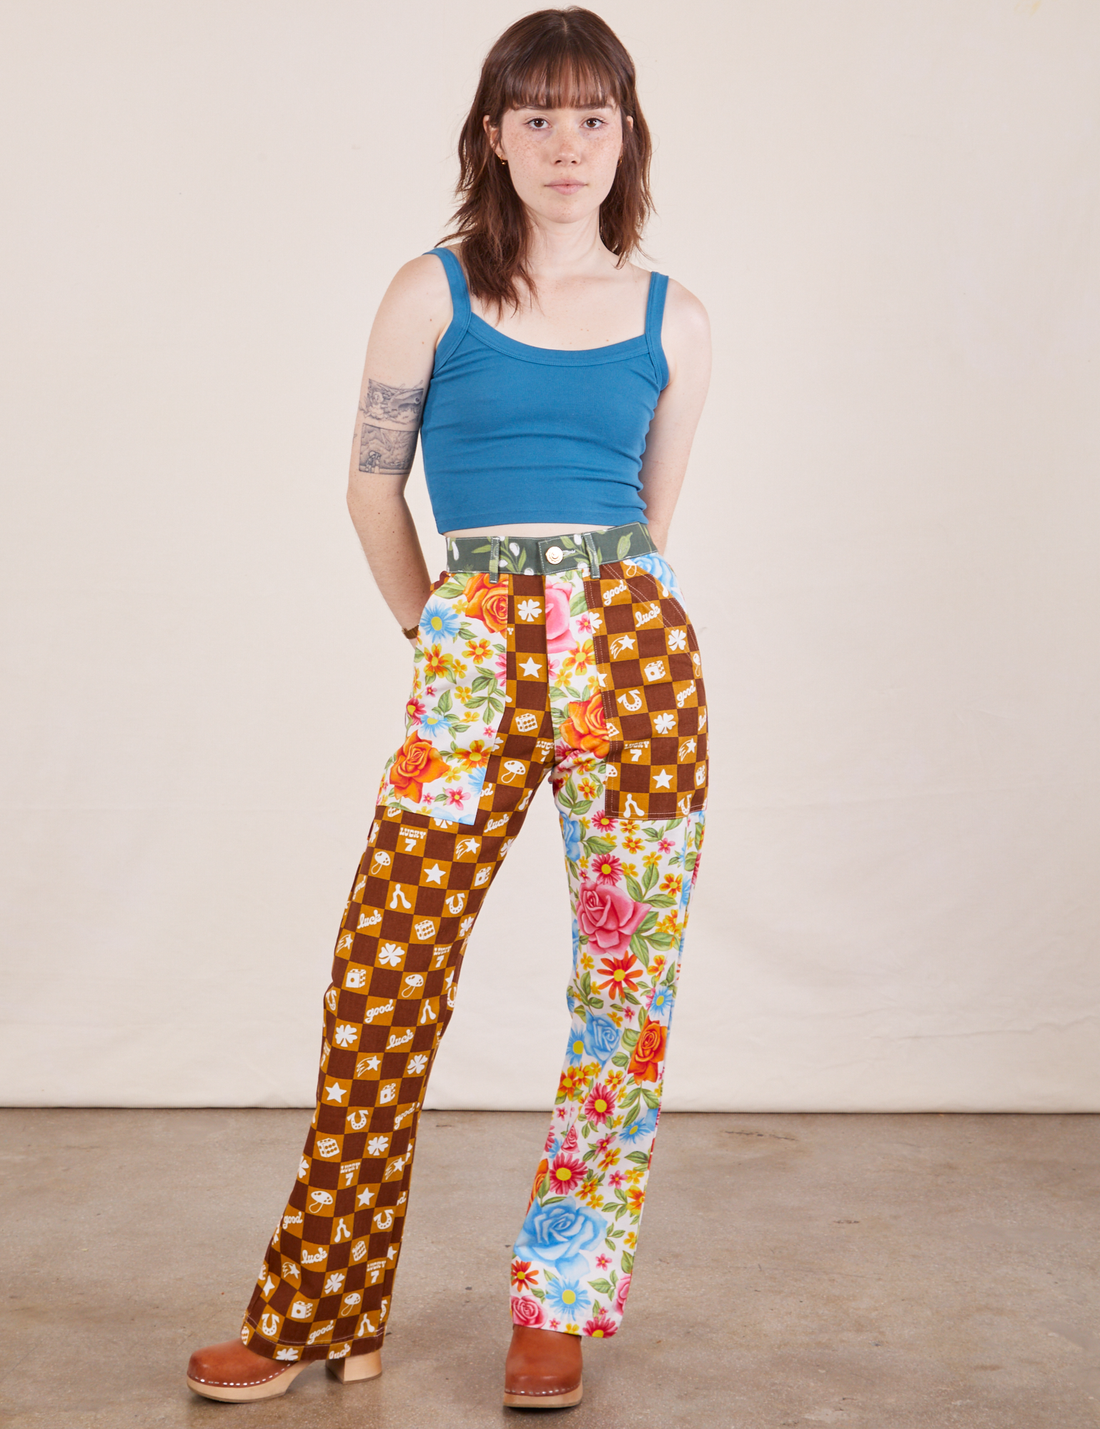 Hana is 5'3" and wearing XXS Petite Mismatched Print Work Pants paired with marine blue Cropped Cami